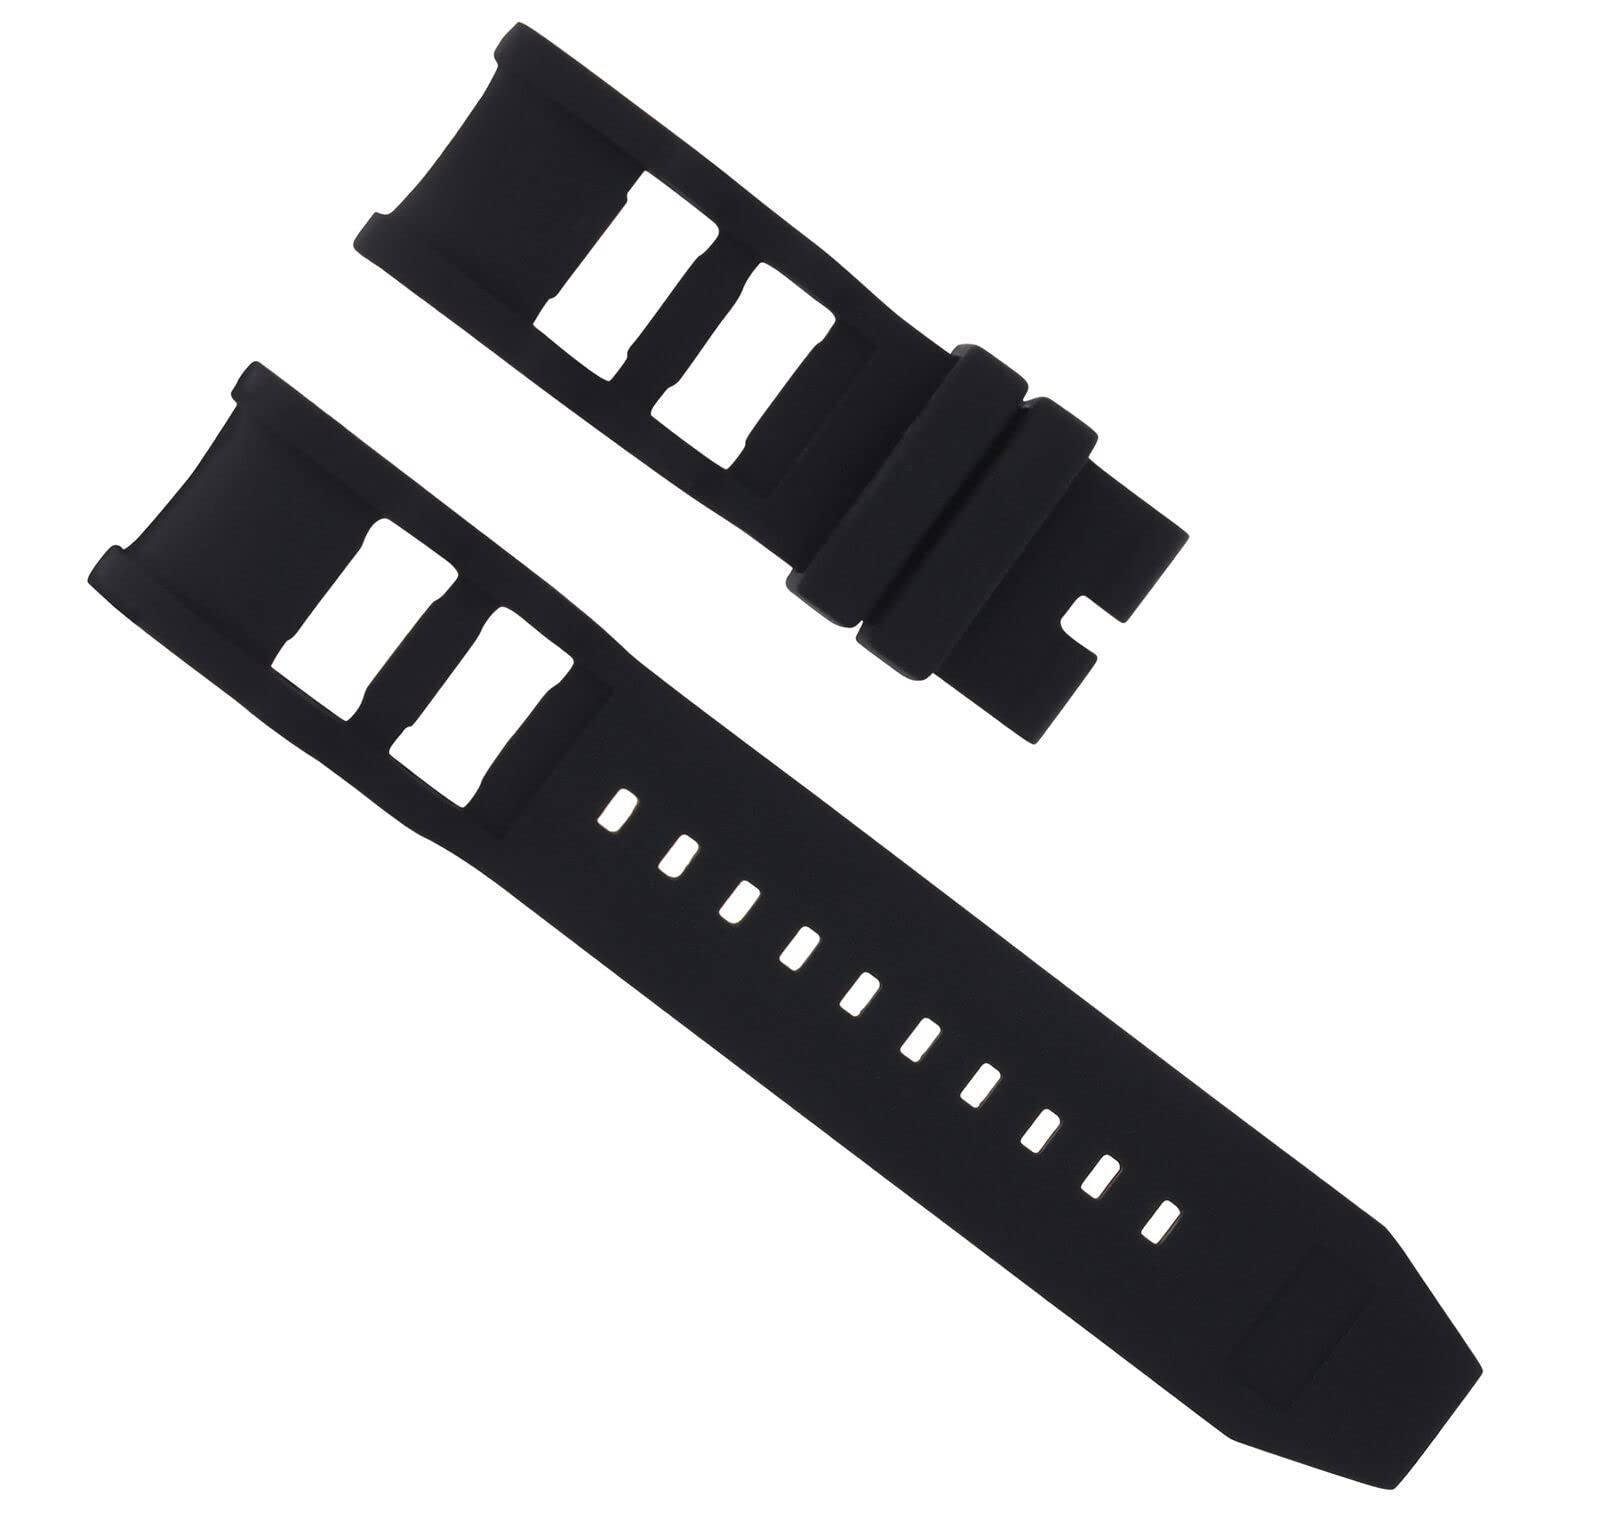 Ewatchparts RUBBER WATCH BAND STRAP COMPATIBLE WITH INVICTA RUSSIAN DIVER 1201 1805 1845 1959 26MM